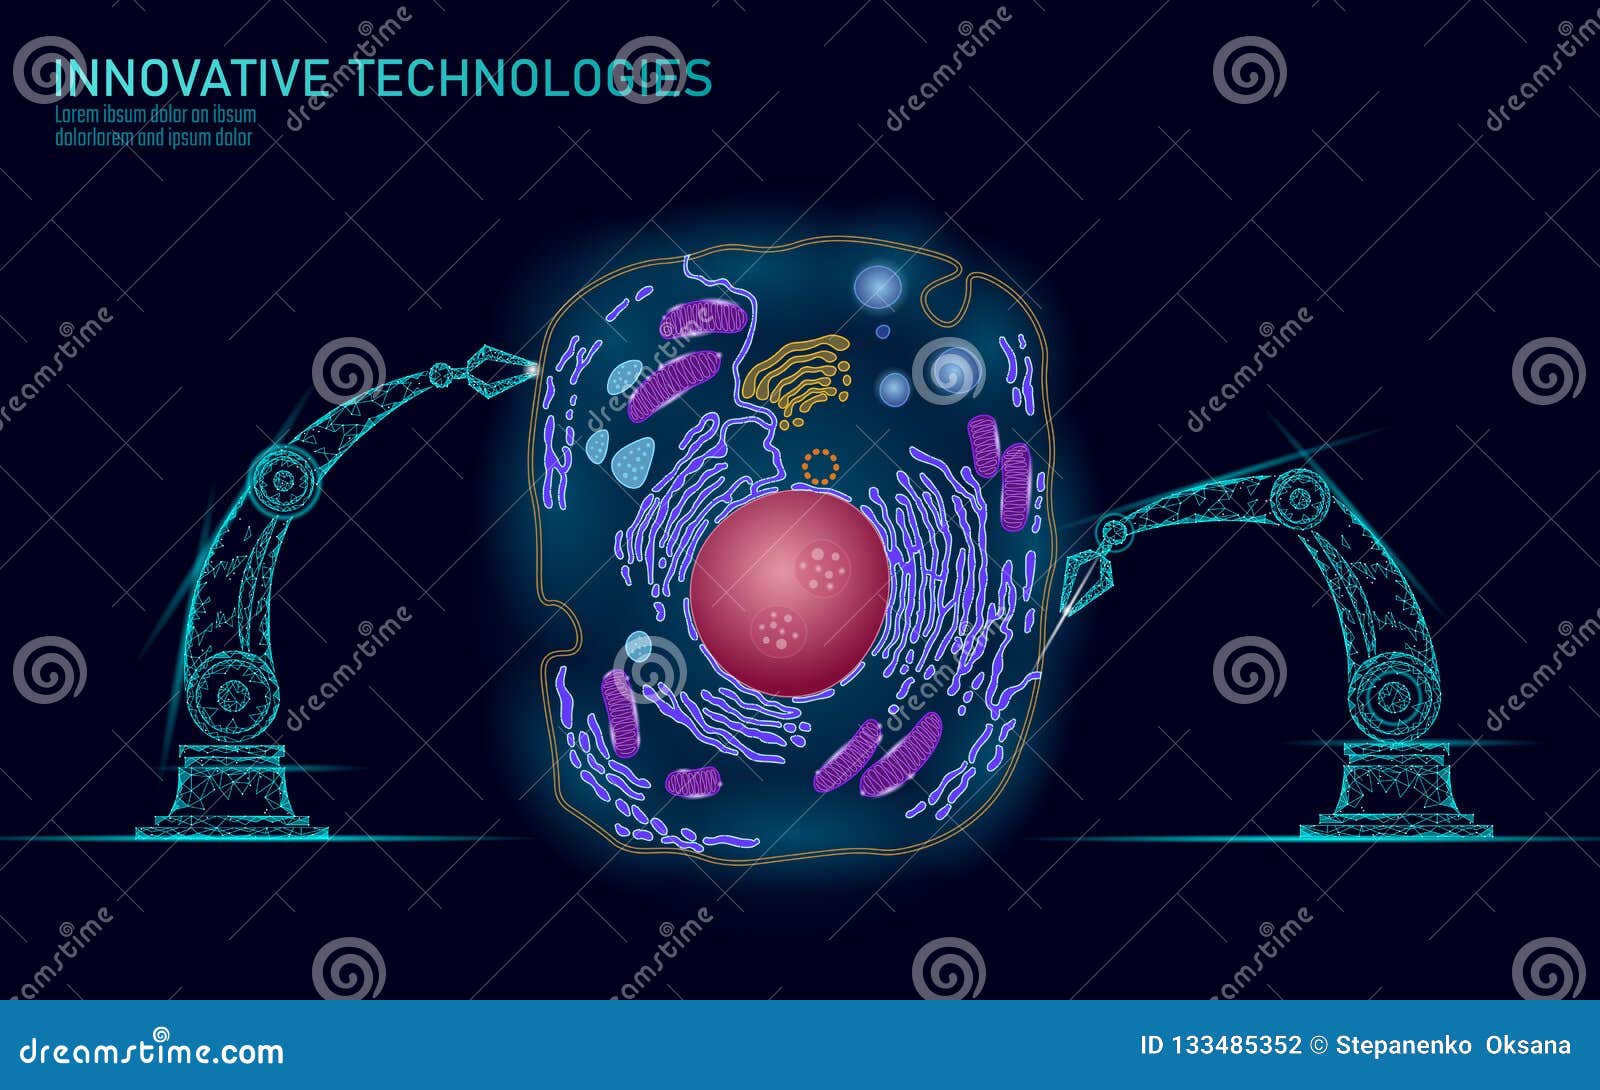 artificial cell synthesys gene therapy dna 3d chemical. animal cell biochemistry engineering research concept. biorobot